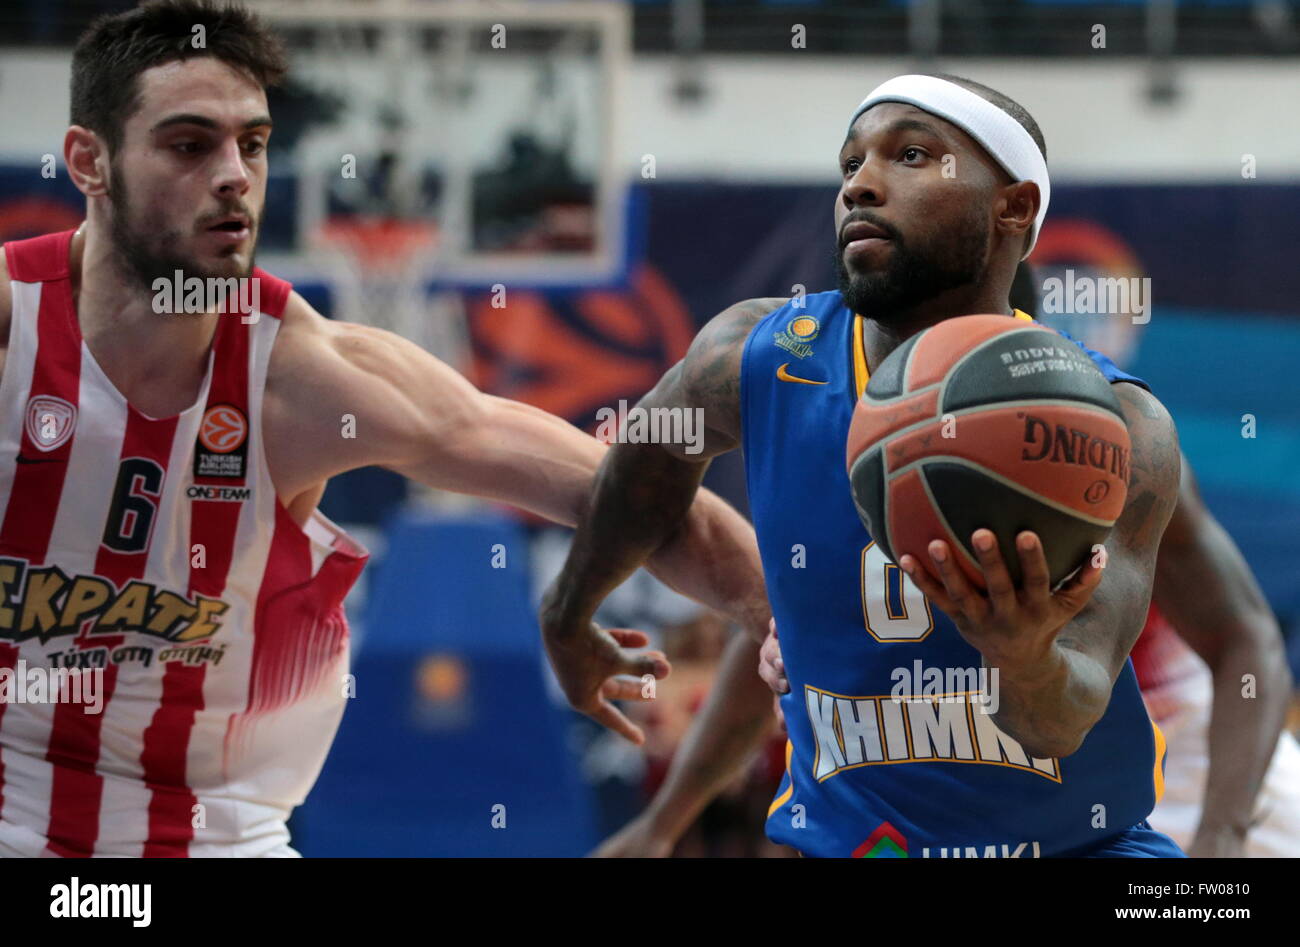 Moscow, Russia. 31st Mar, 2016. Olympiacos' Ioannis Papapetrou (L) and  Khimki's Tyrese Rice in action in their 2015/16 Season Euroleague Top 16  Group F Round 13 basketball match at Dynamo Sports Palace